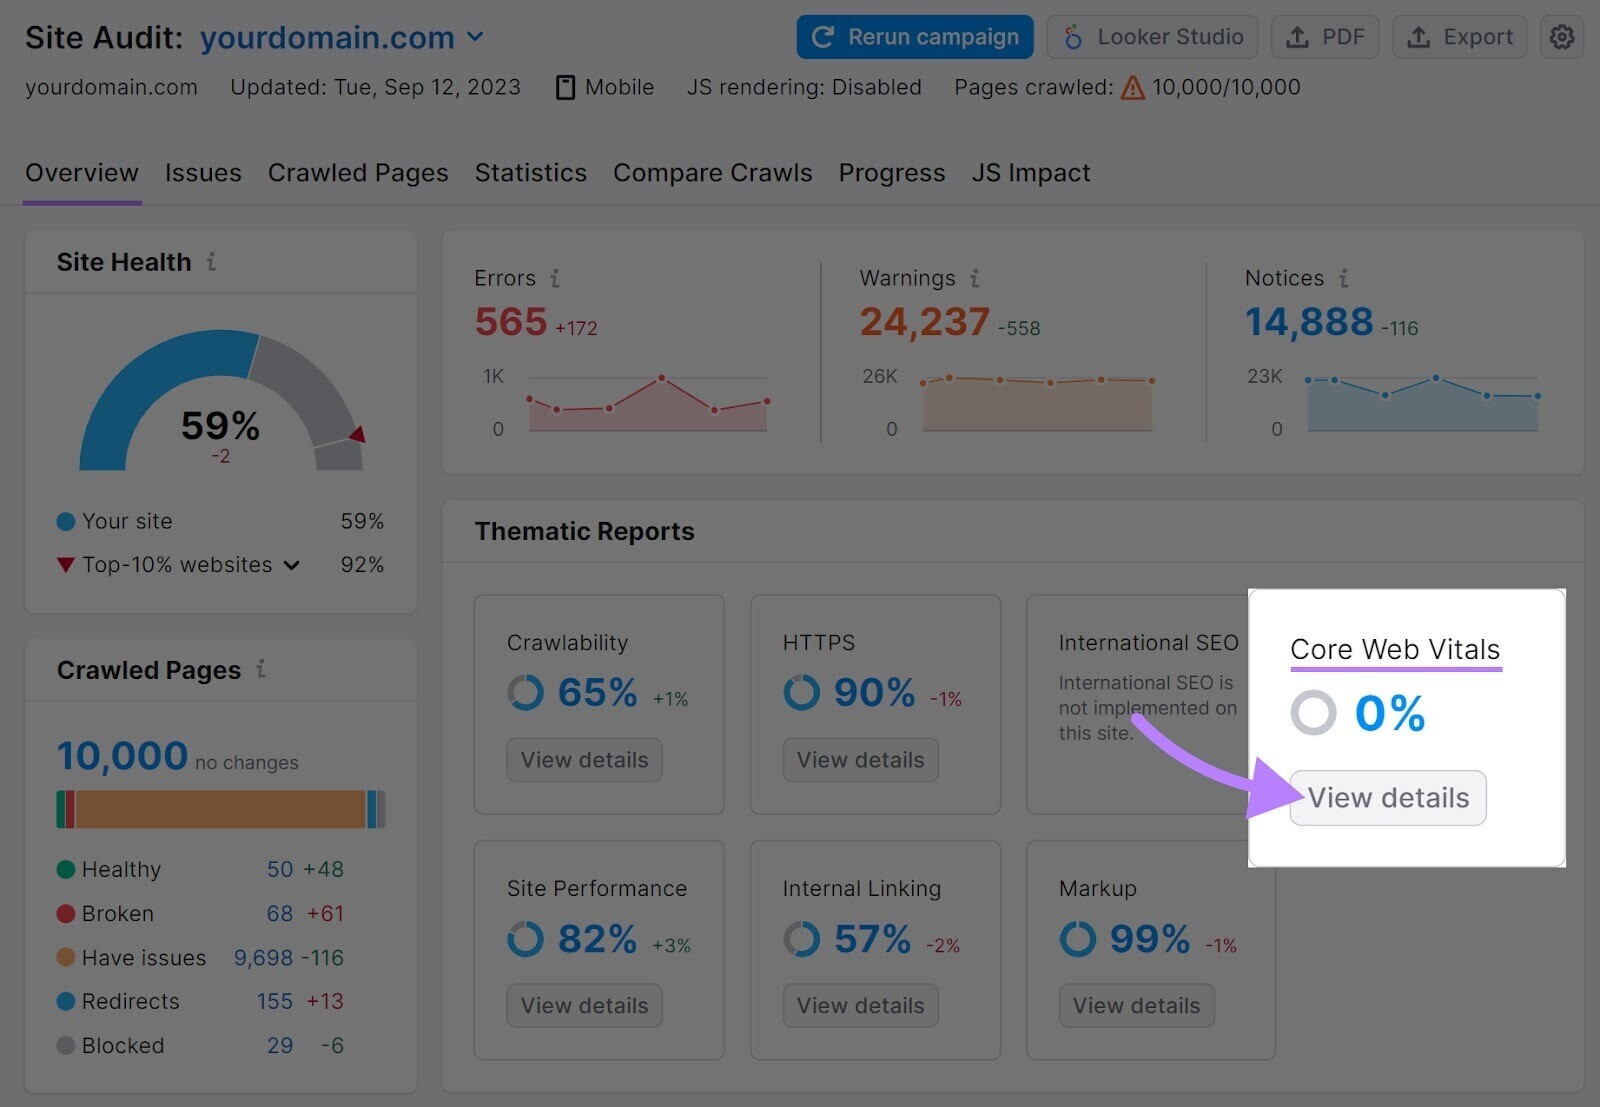 “Core Web Vitals” box highlighted in Site Audit's overview dashboard